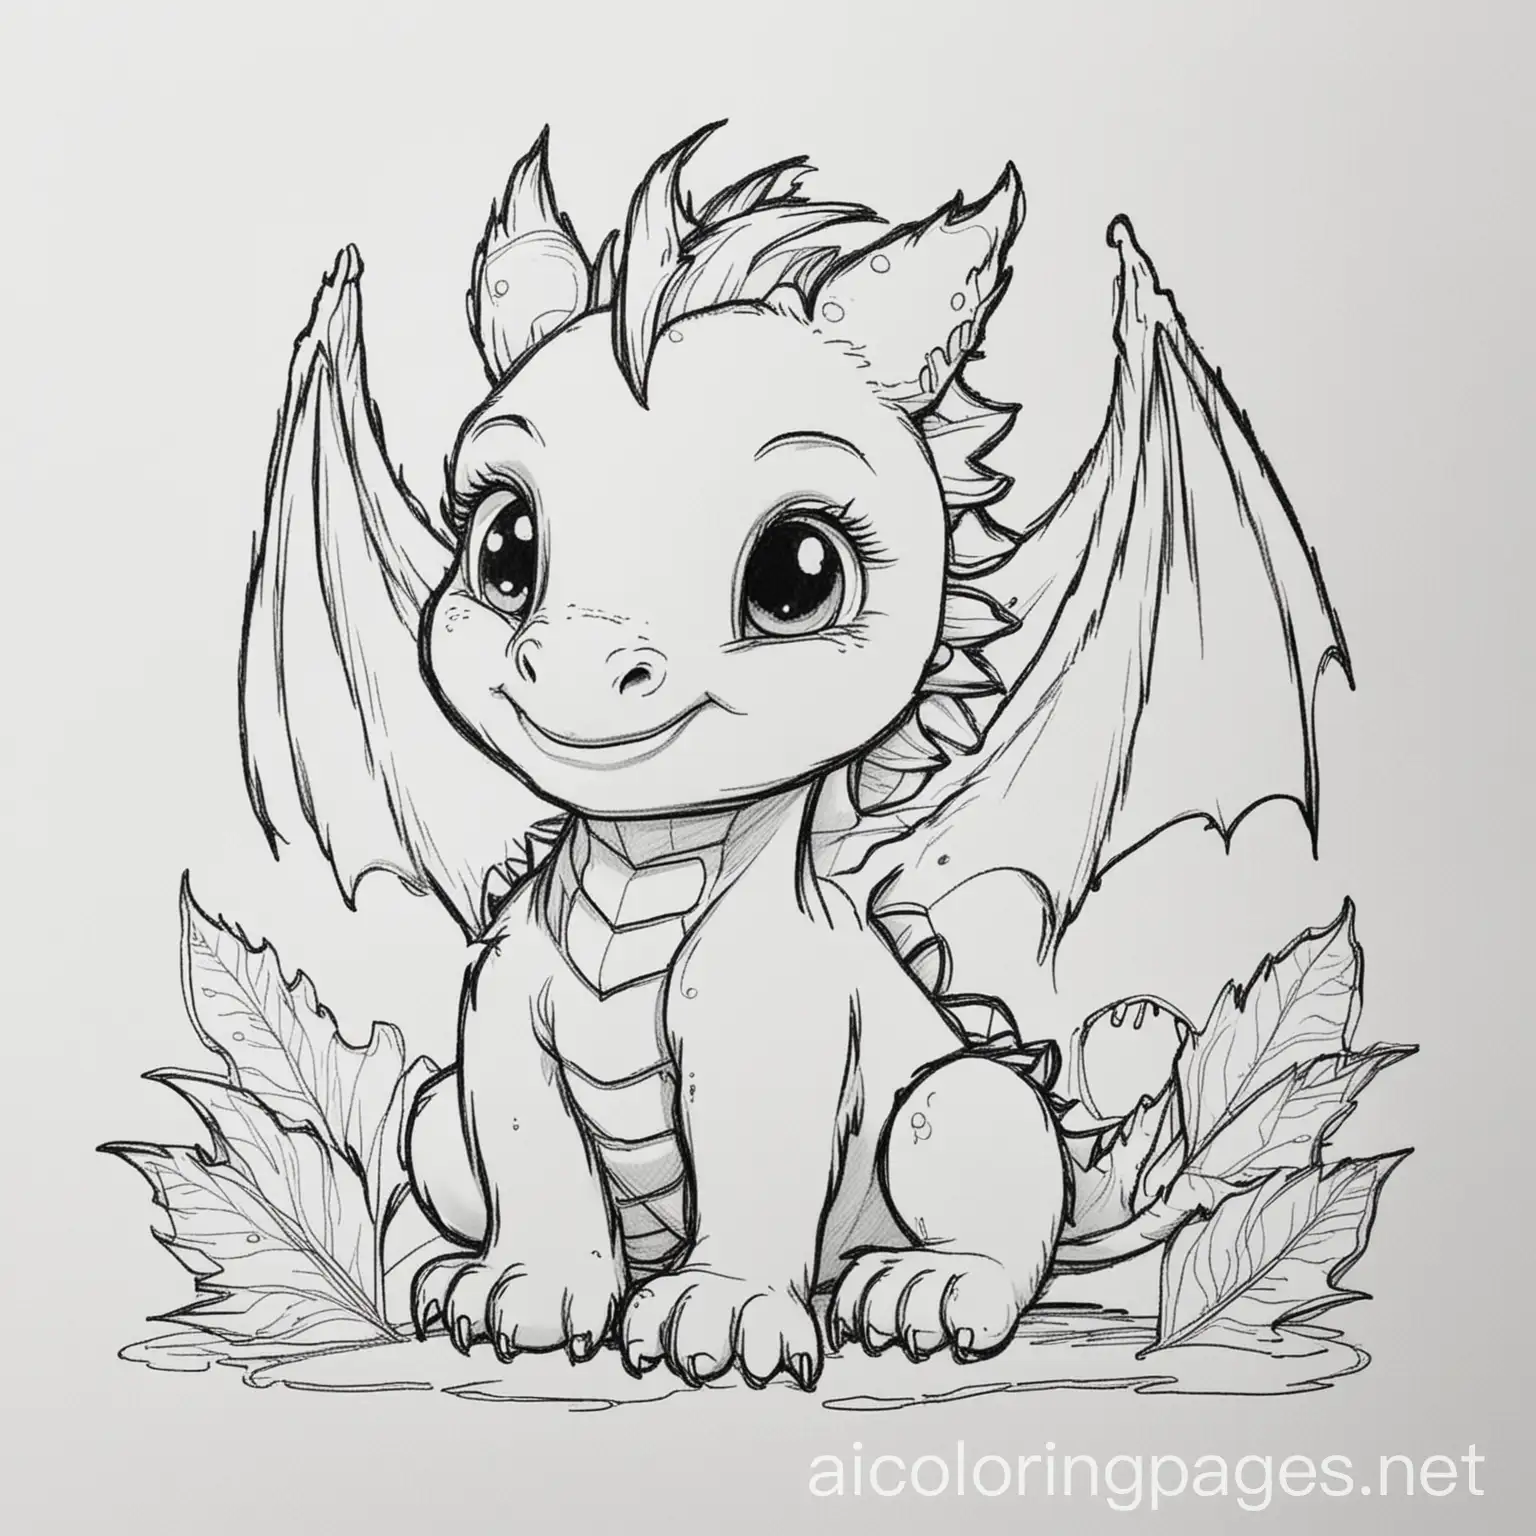 baby dragon theme, Coloring Page, black and white, line art, white background, Simplicity, Ample White Space. The background of the coloring page is plain white to make it easy for young children to color within the lines. The outlines of all the subjects are easy to distinguish, making it simple for kids to color without too much difficulty, Coloring Page, black and white, line art, white background, Simplicity, Ample White Space. The background of the coloring page is plain white to make it easy for young children to color within the lines. The outlines of all the subjects are easy to distinguish, making it simple for kids to color without too much difficulty